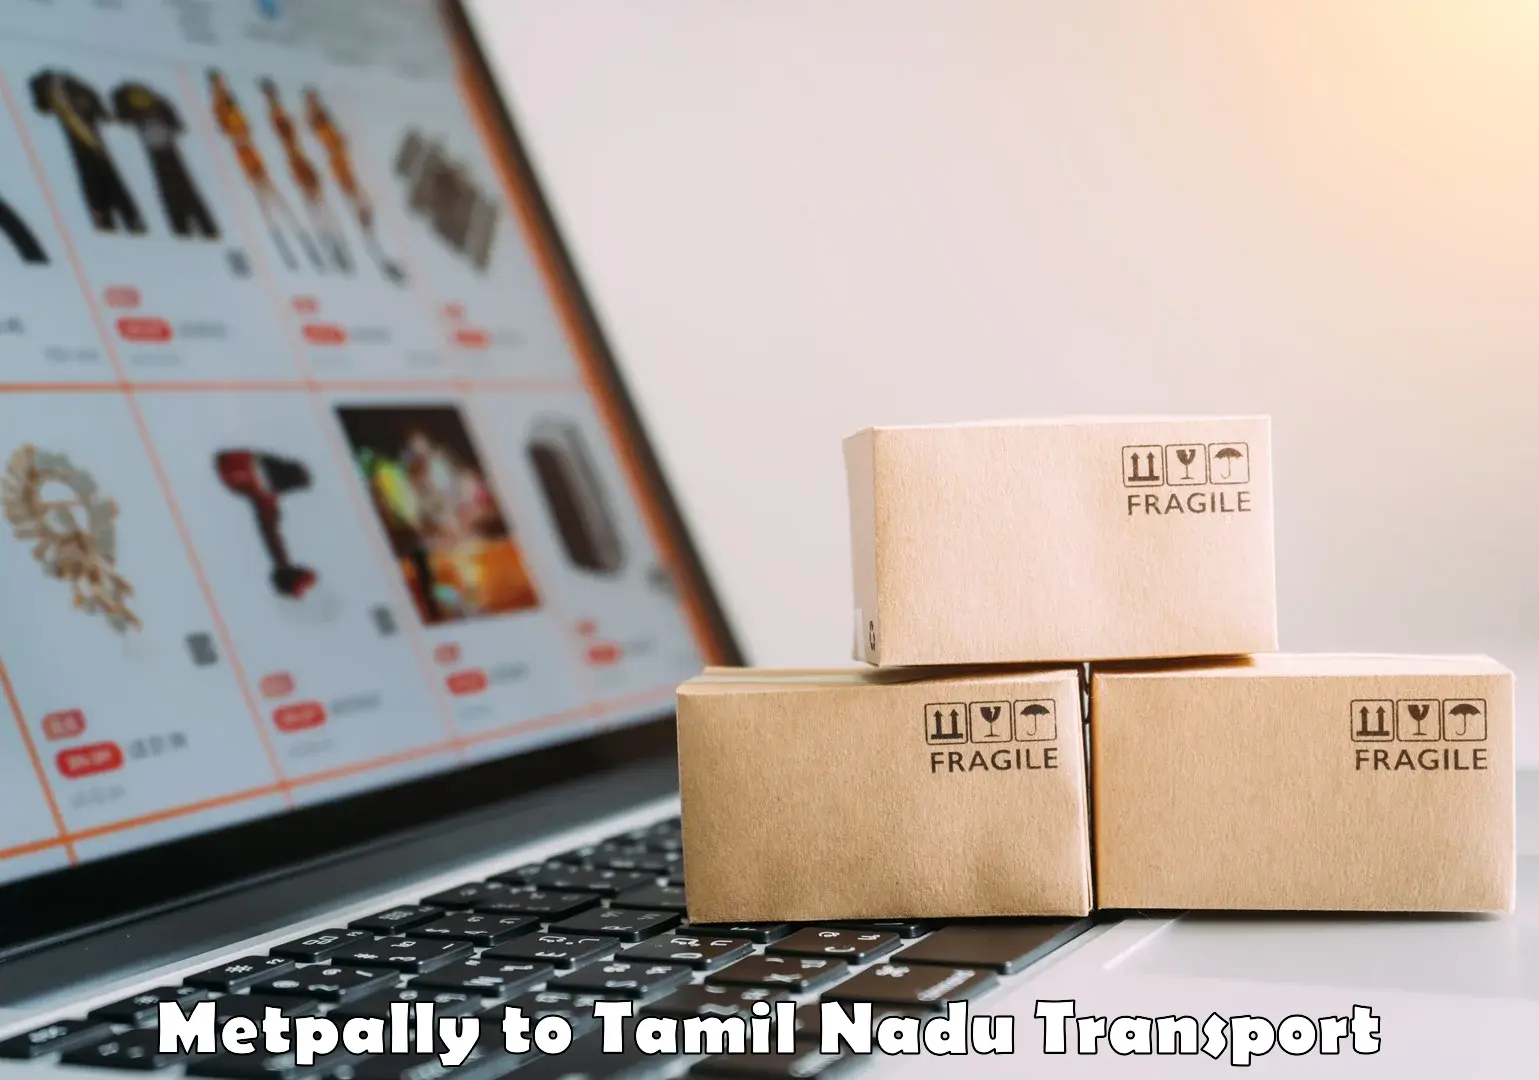 Daily transport service Metpally to Melur